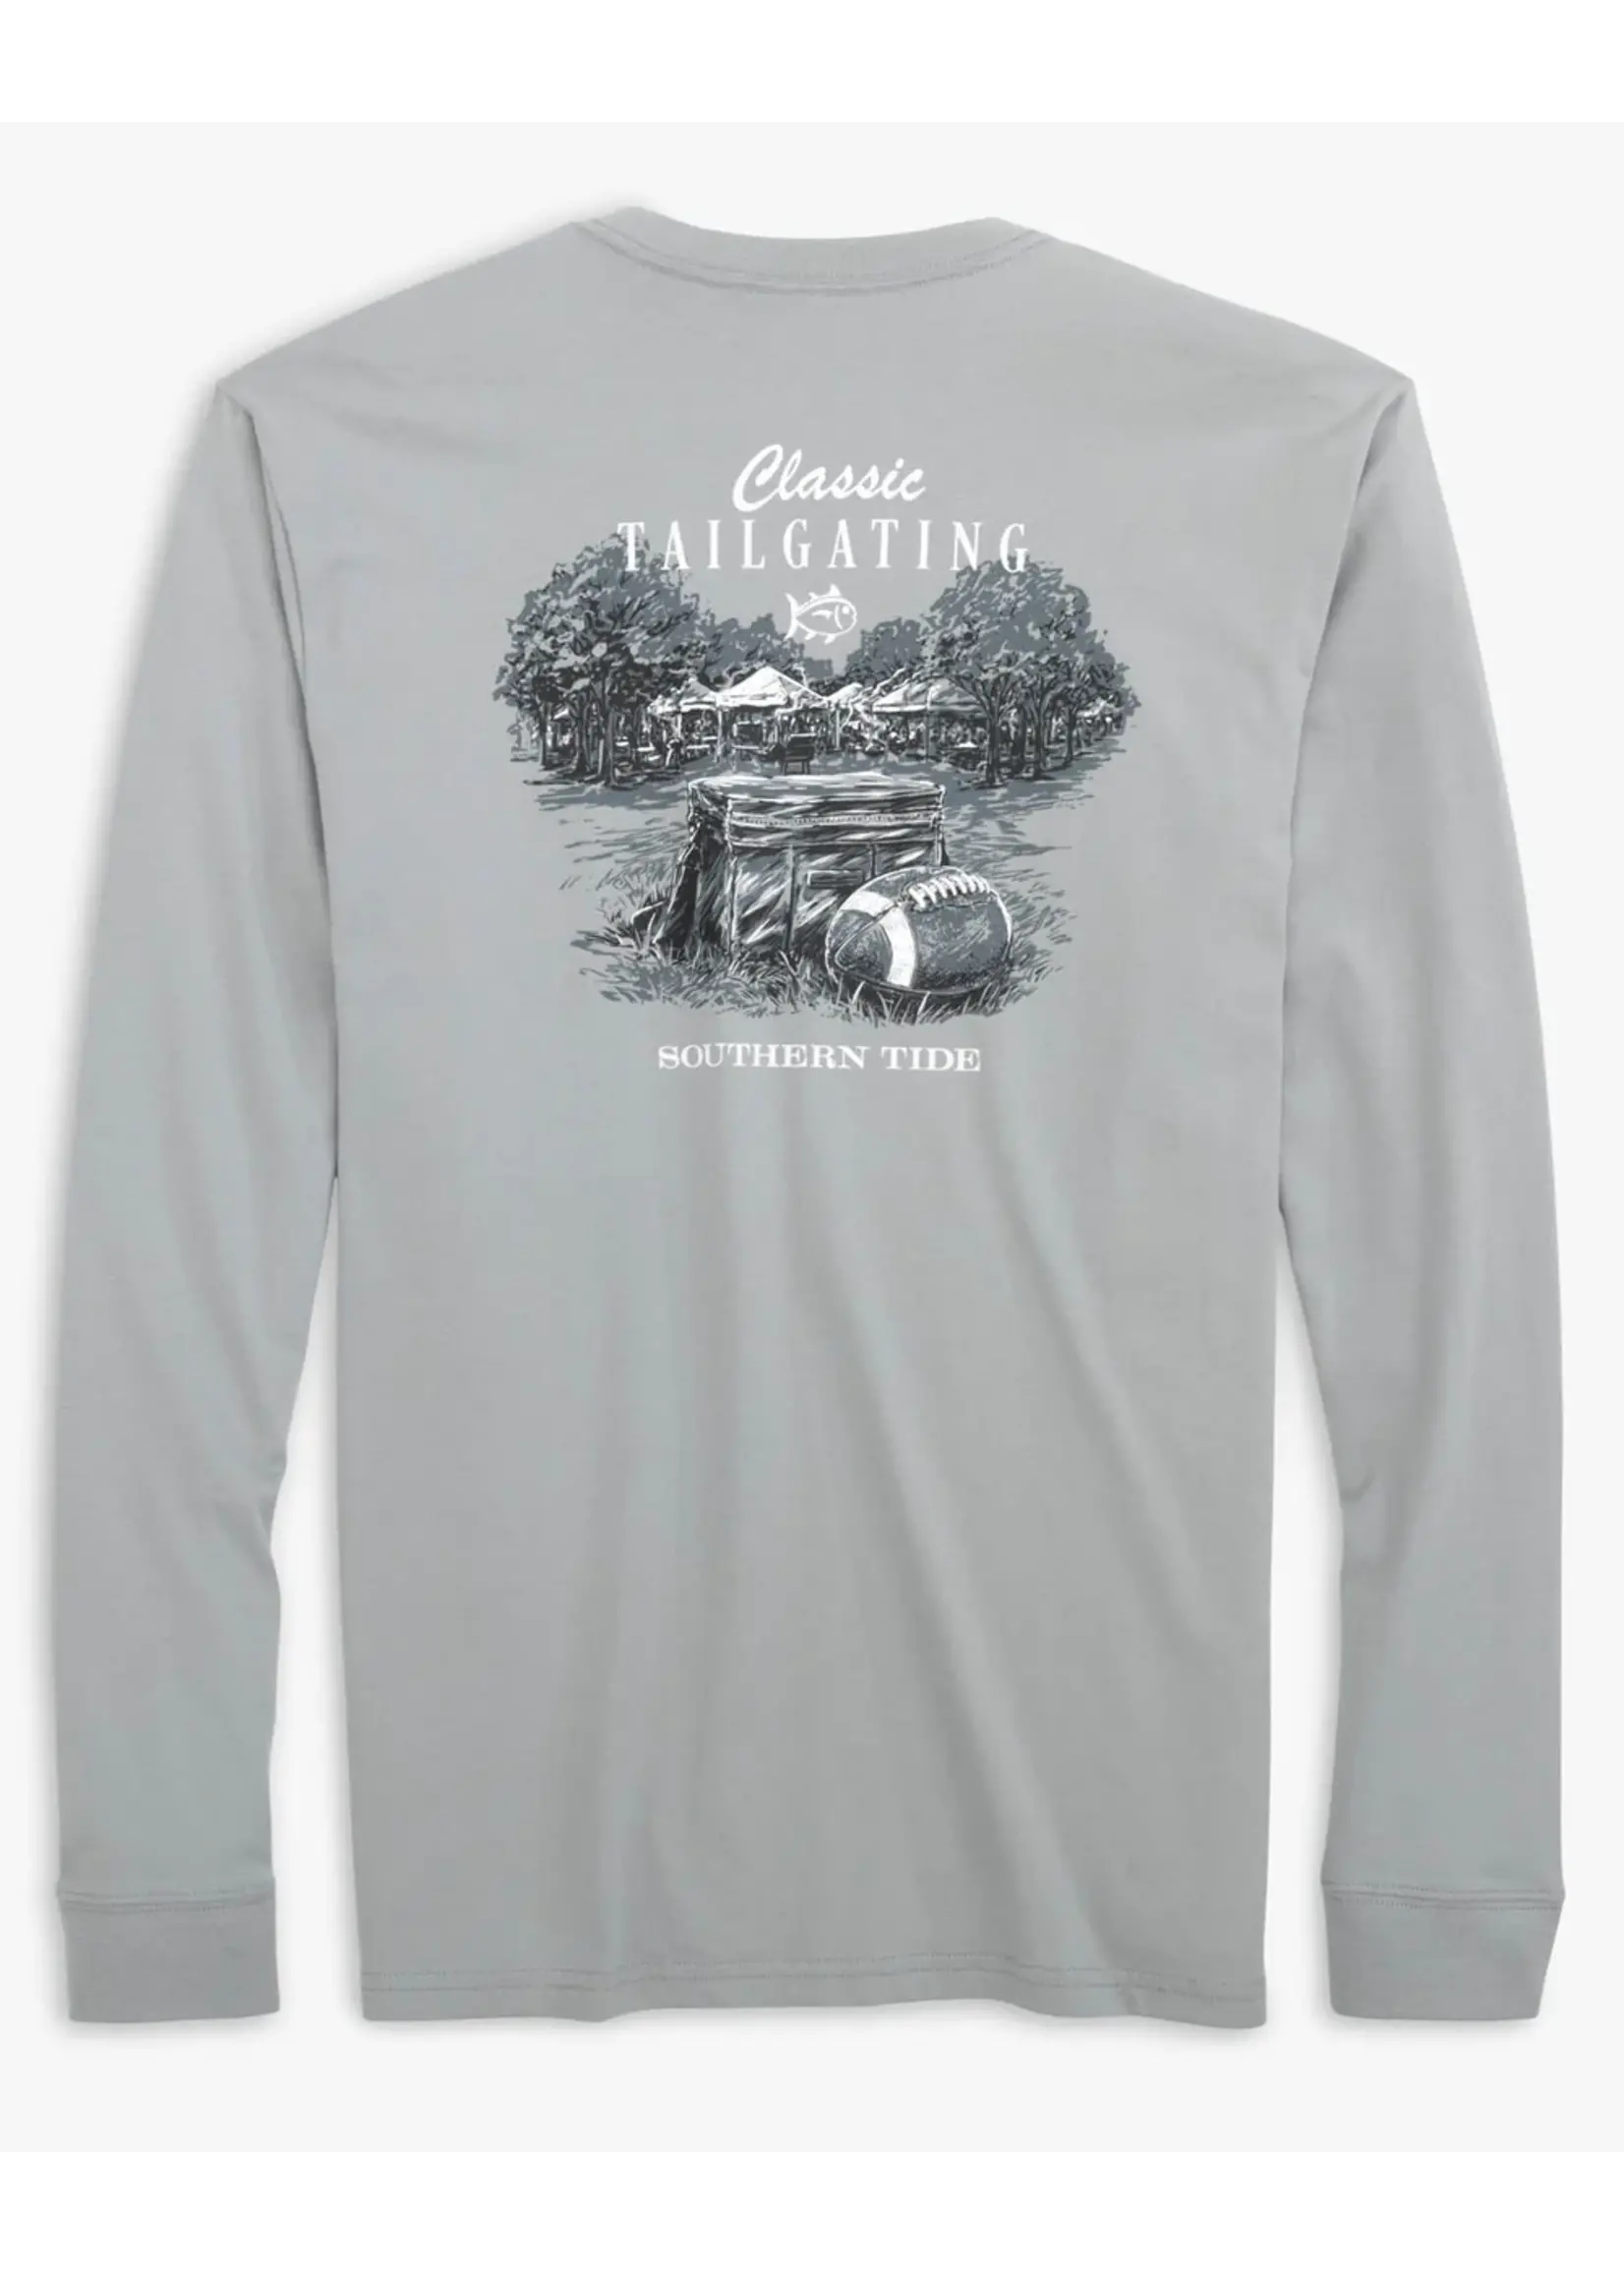 Southern Tide Southern Tide LS Classic Tailgating Tee Grey